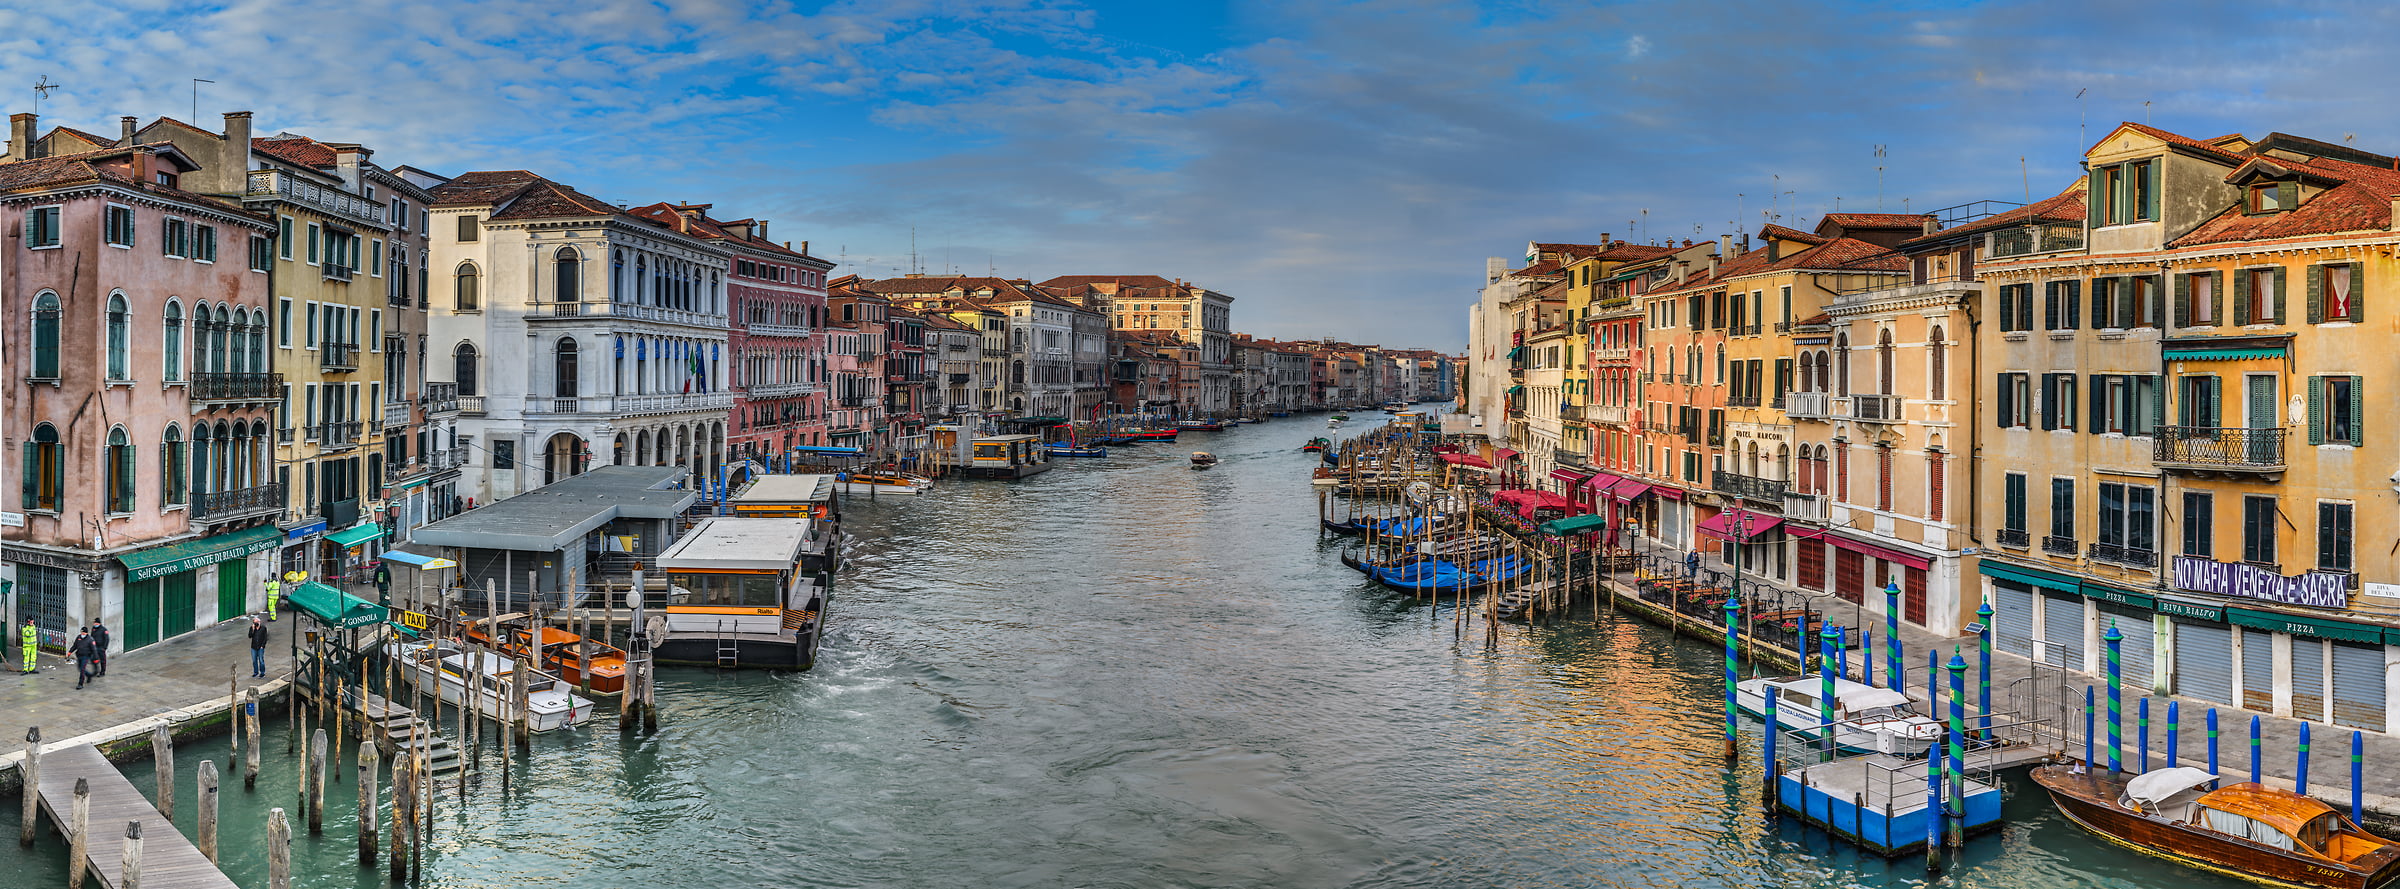 1,629 megapixels! A very high resolution, large-format VAST photo print of a canal in Venice, Italy; photograph created by Alfred Feil at Rialto Bridge in Venice, Italy.